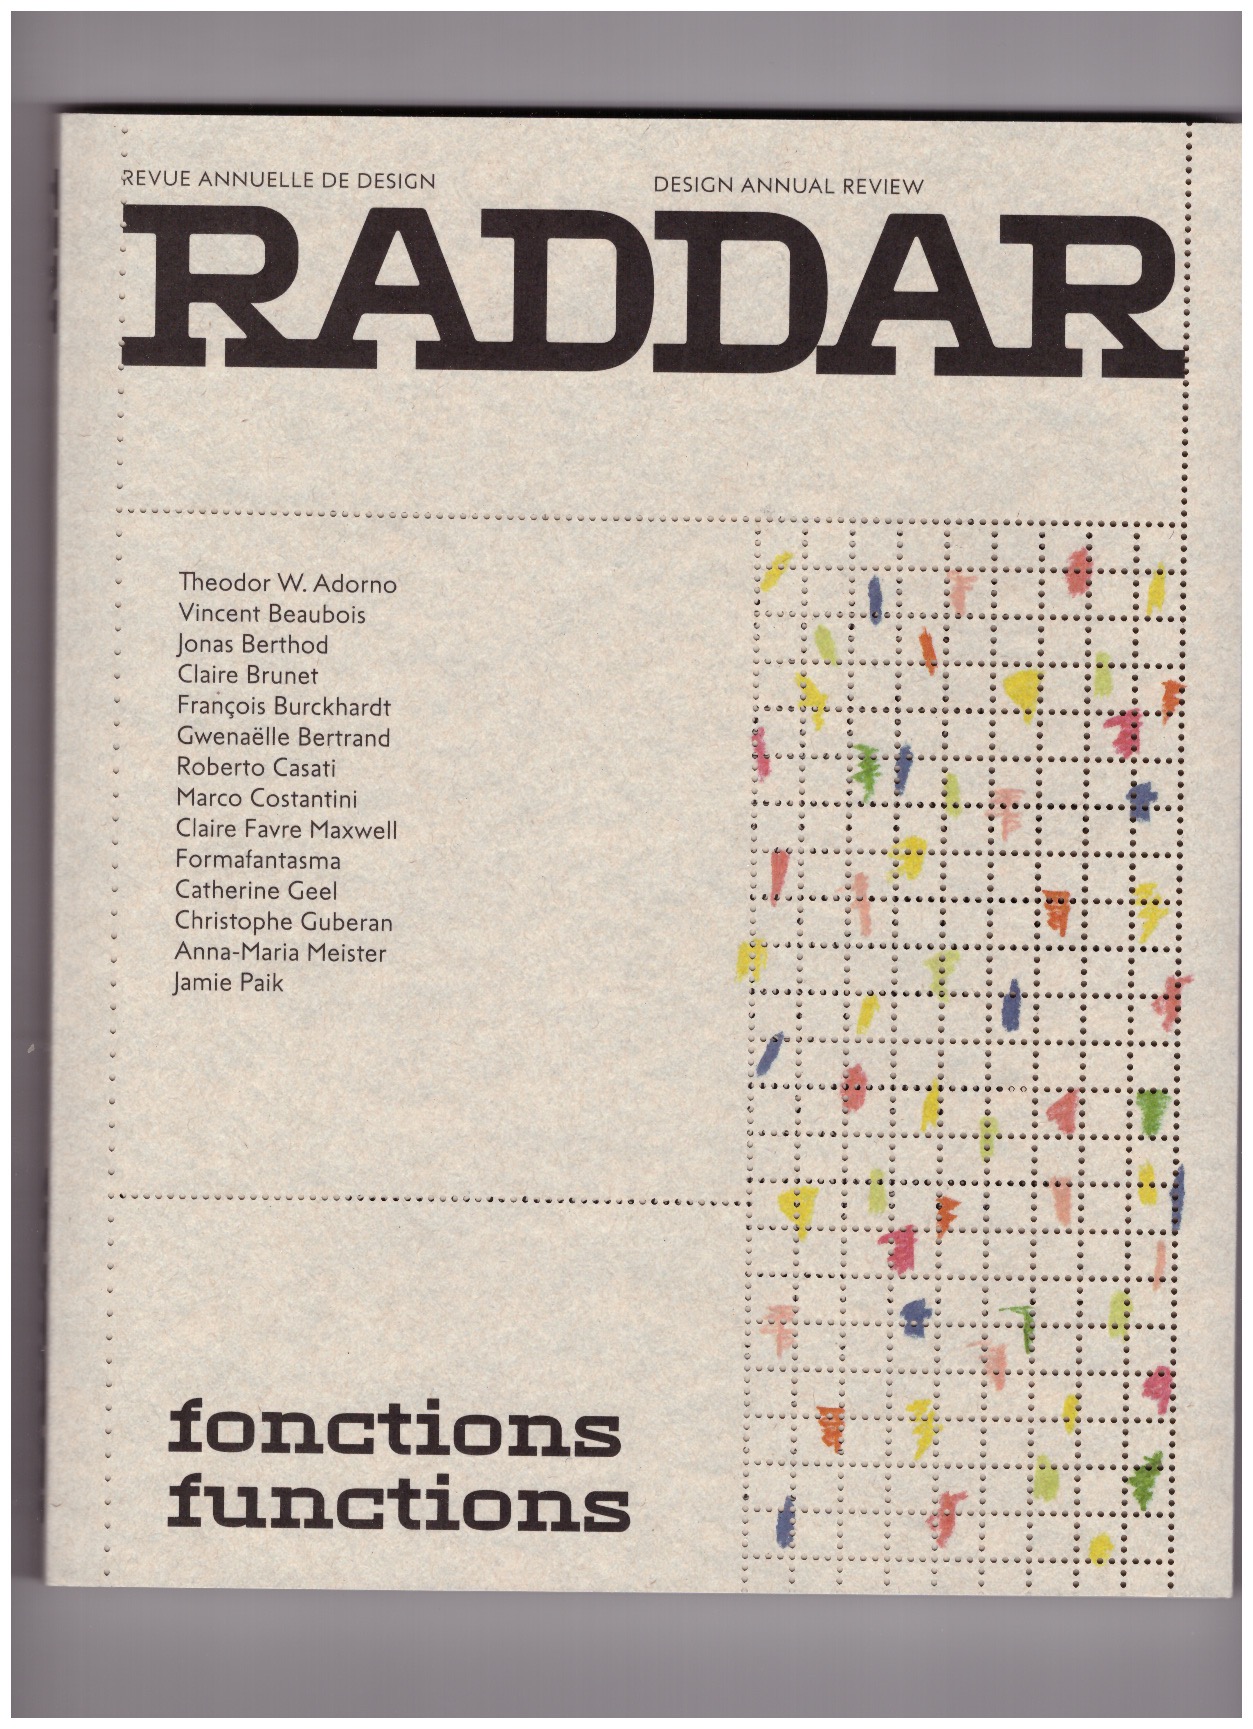 PROD'HOM, Chantal; FAVRE MAXWELL, Claire; COSTANTINI, Marco (eds.) - RADDAR N°1 — Fonctions/Functions